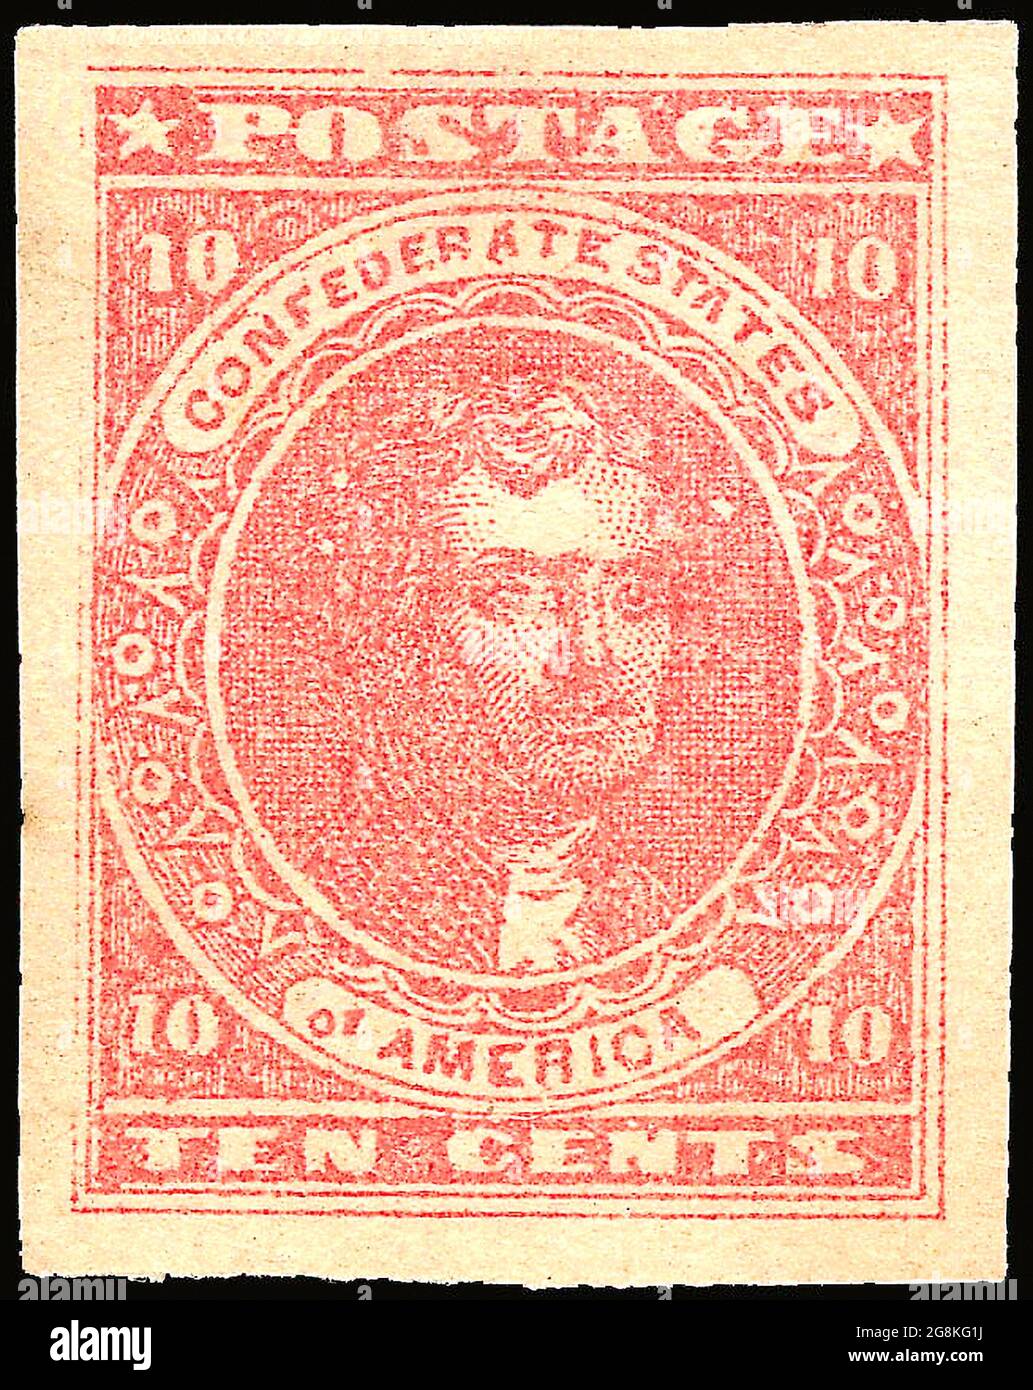 Confederate postage stamp, ten cent rose, general issue 1862, type 5 Postage stamp depicts Thomas Jefferson printed in red. Postal service of the Confederate States of America. Stock Photo